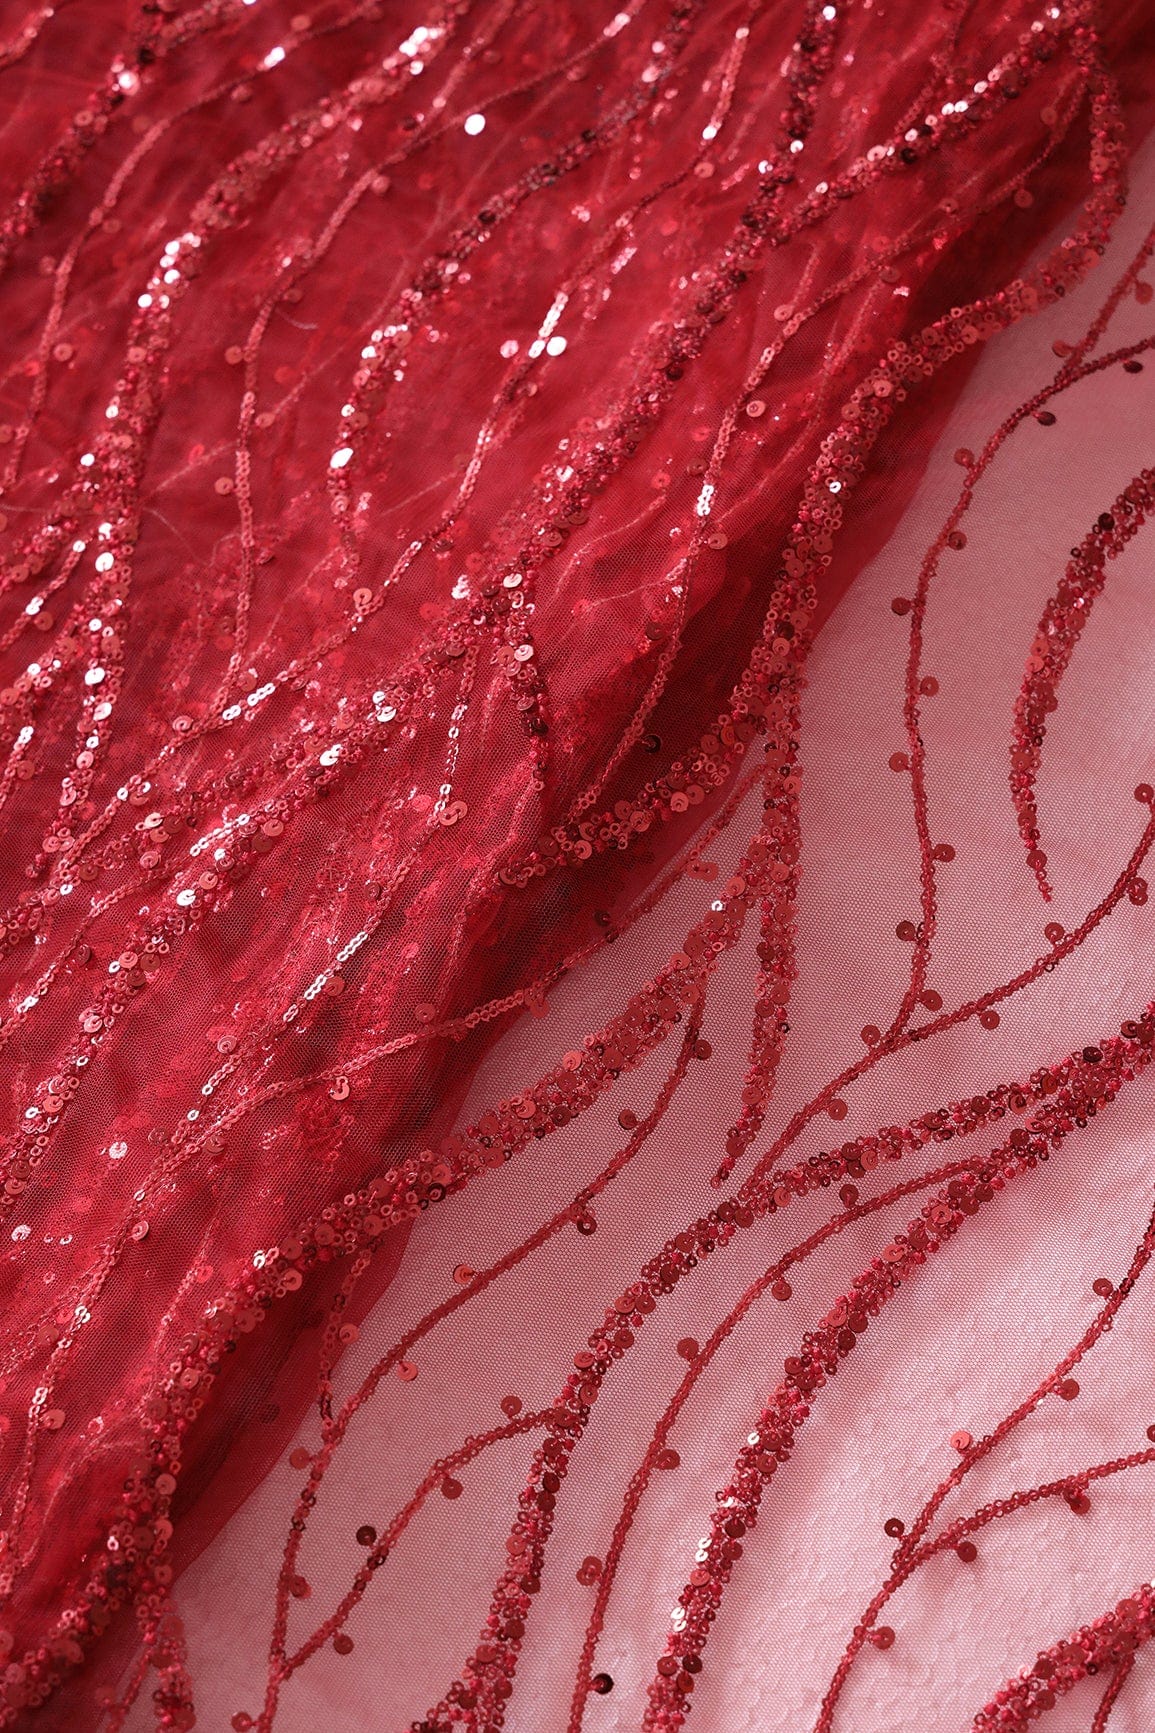 doeraa Embroidery Fabrics Beautiful Sequins With Red Thread Wavy Embroidery Work On Red Soft Net Fabric